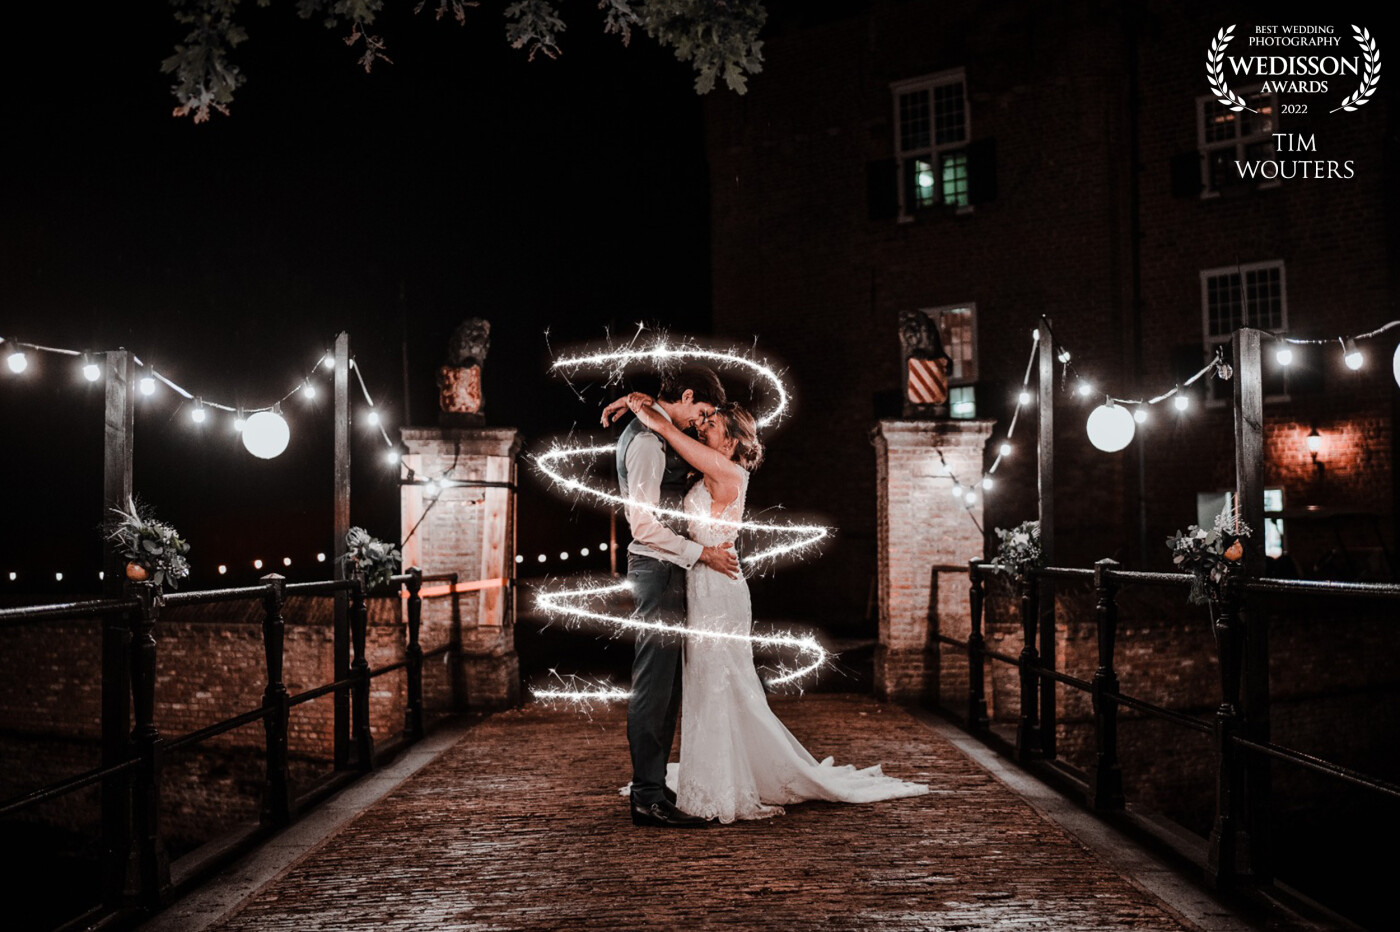 We love to get creative with our couples! When this couple wanted to go out in the dark and create something cool we didnt hesitate for one second. Using ambient light from the decorartion on the bridge we had just enough light to set right mood!